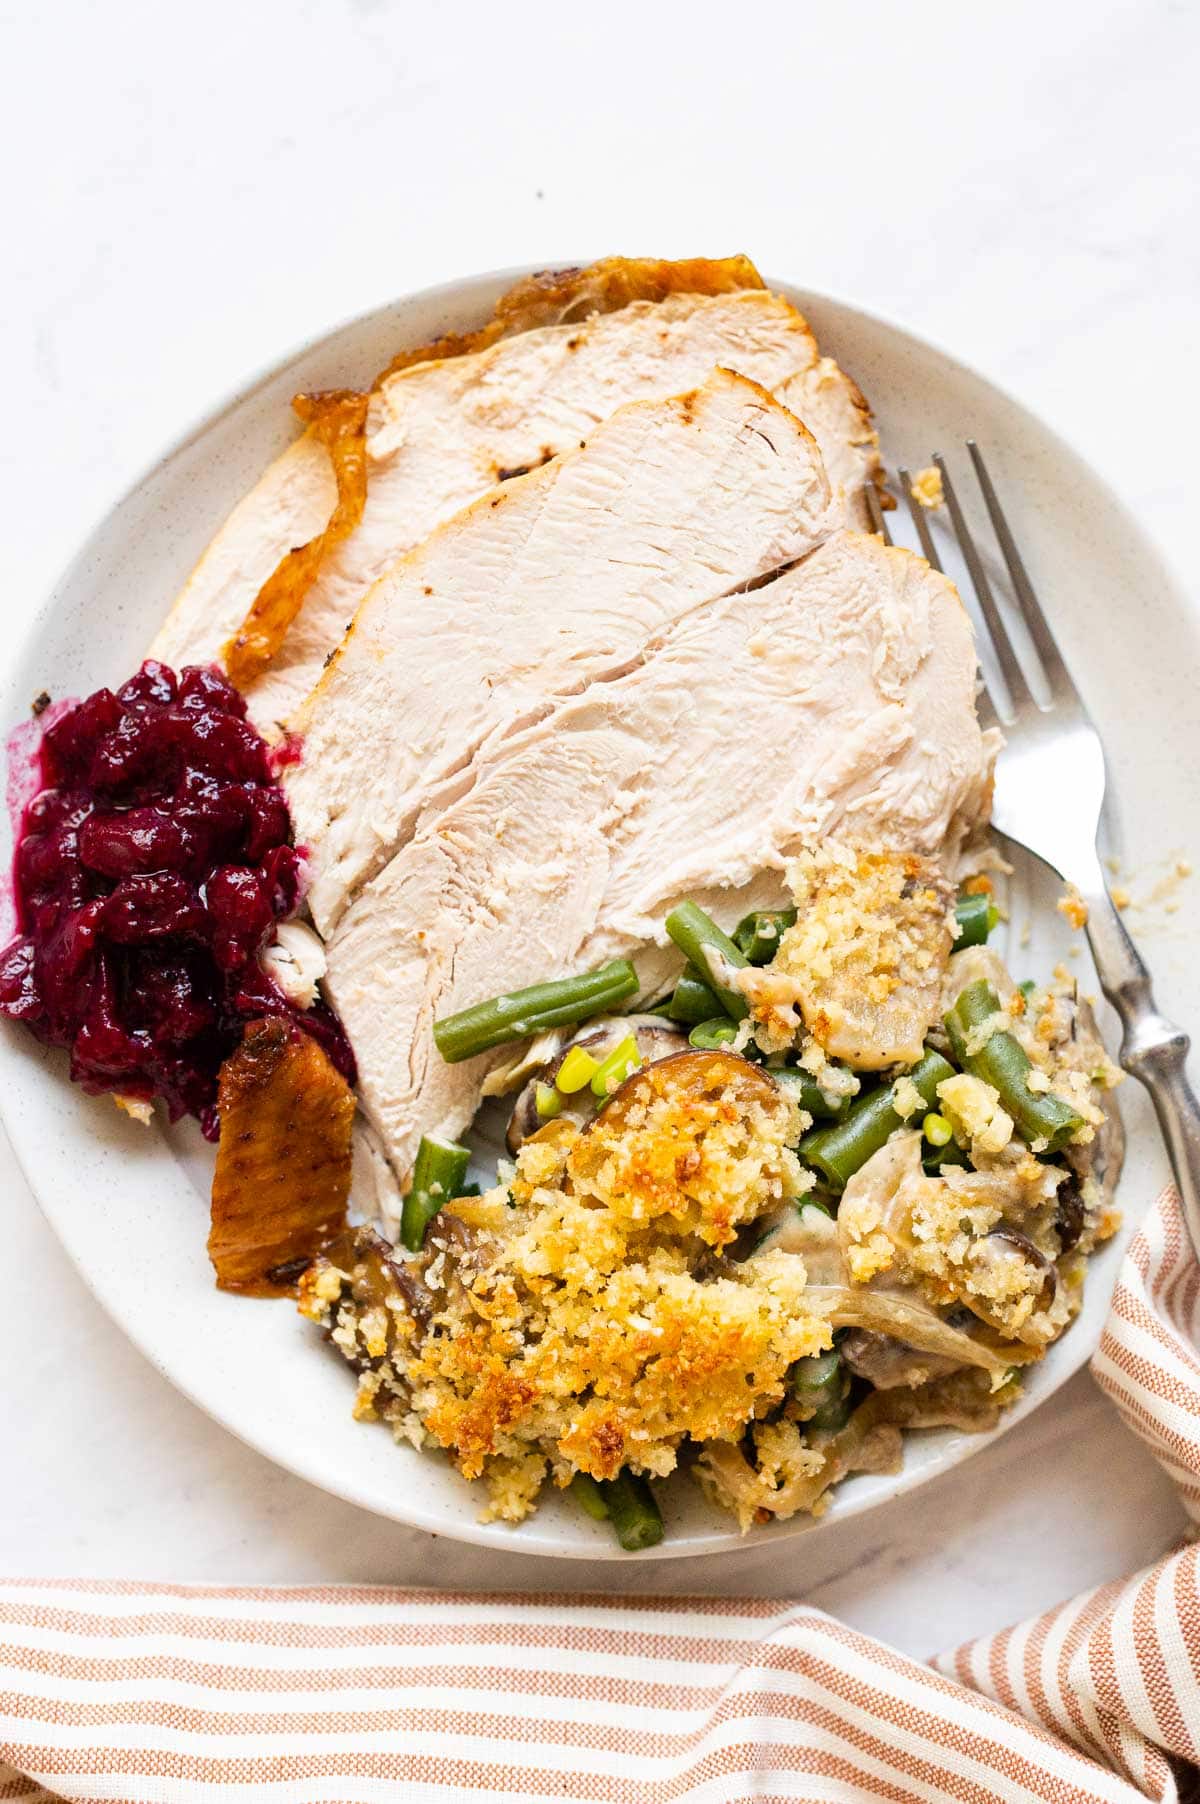 Sliced turkey breast served with cranberry sauce and green bean casserole on a plate.